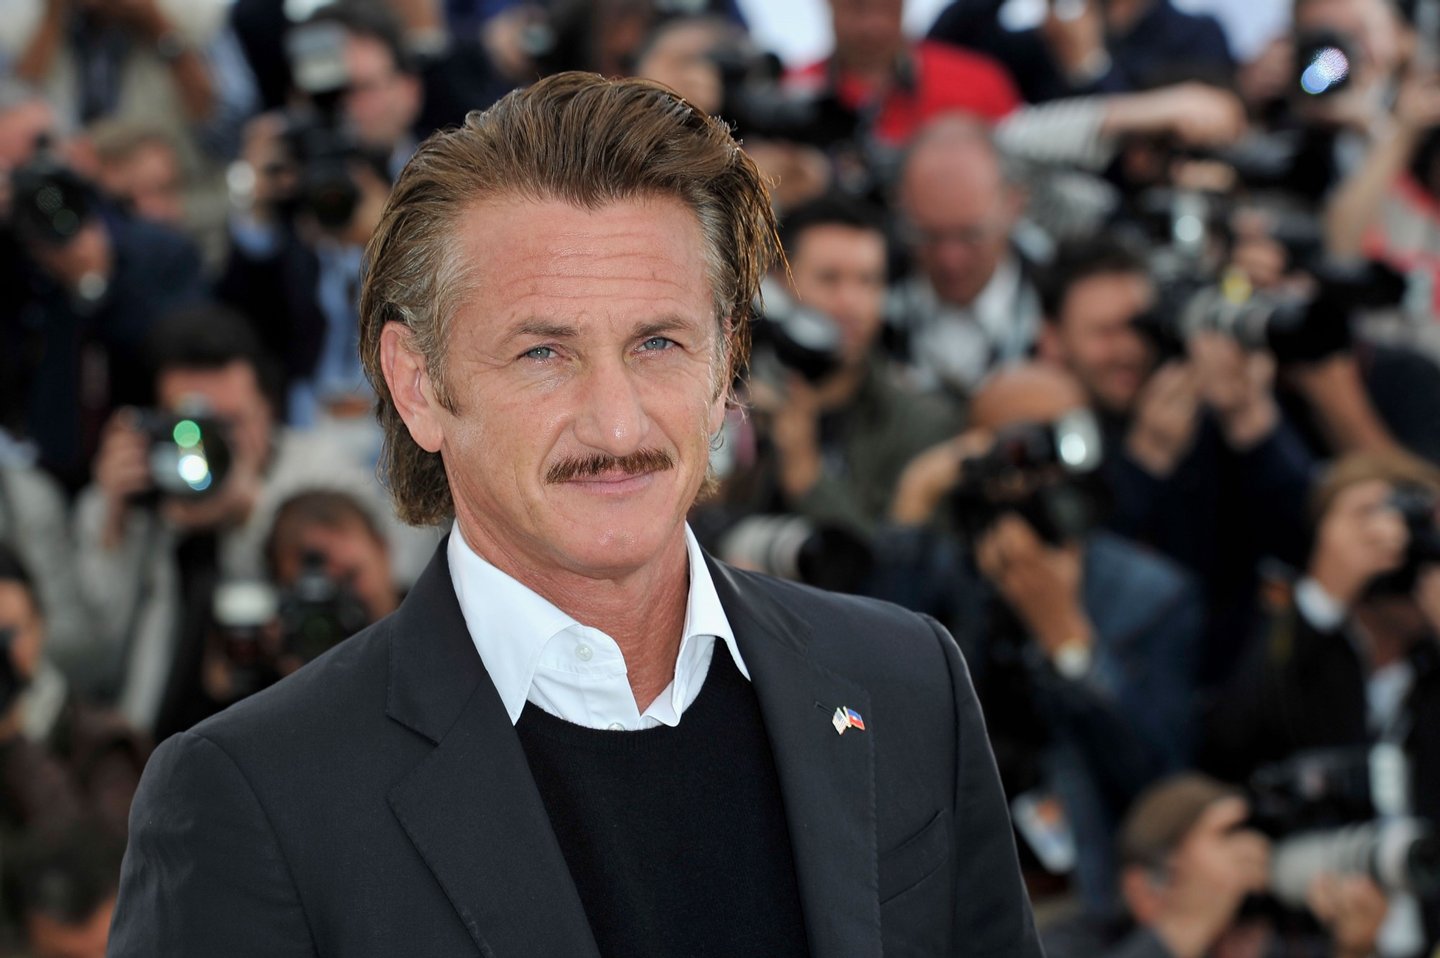 CANNES, FRANCE - MAY 18: Actor Sean Penn poses at the "Haiti Carnaval In Cannes" photocall during the 65th Annual Cannes Film Festival on May 18, 2012 in Cannes, France. (Photo by Gareth Cattermole/Getty Images)